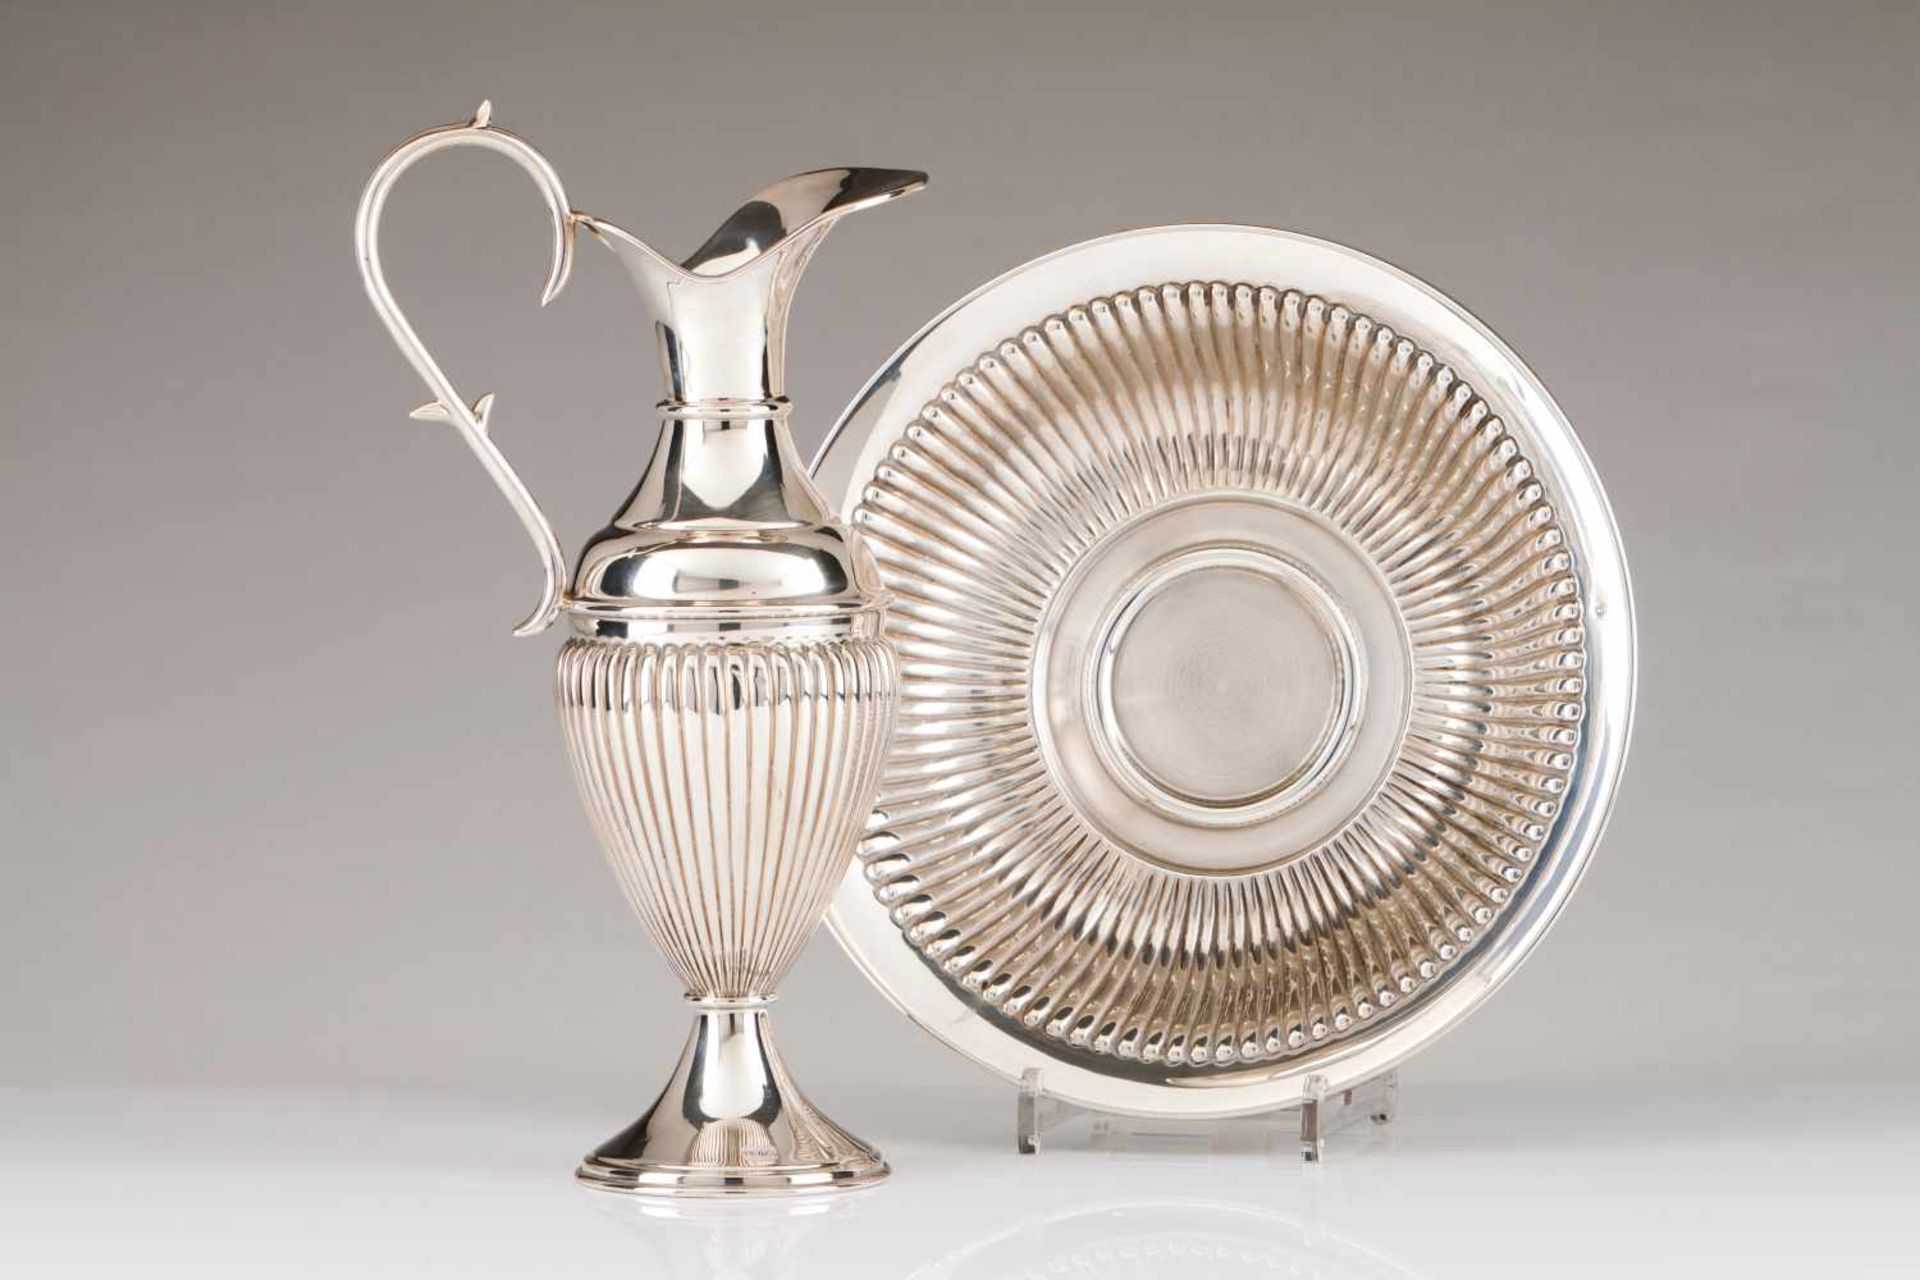 Ewer and basinPortuguese silverFluted decorationPorto assay mark (after 1985) and maker's mark(